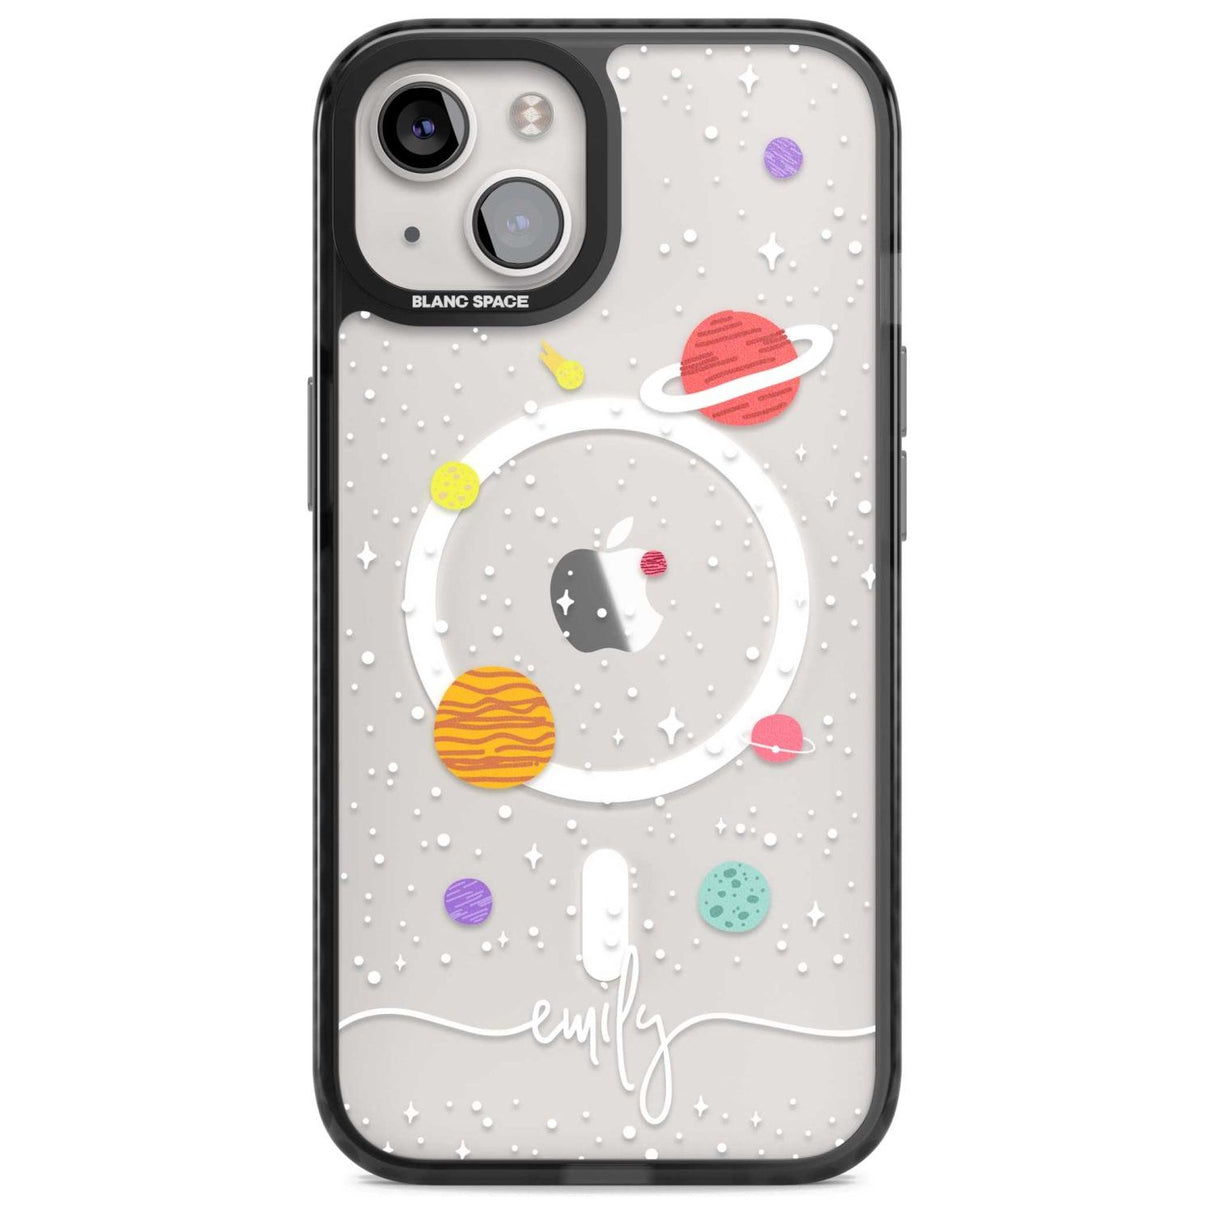 Personalised Cute Cartoon Planets (Clear) Phone Case iPhone 15 Plus / Magsafe Black Impact Case,iPhone 15 / Magsafe Black Impact Case,iPhone 14 Plus / Magsafe Black Impact Case,iPhone 14 / Magsafe Black Impact Case,iPhone 13 / Magsafe Black Impact Case Blanc Space